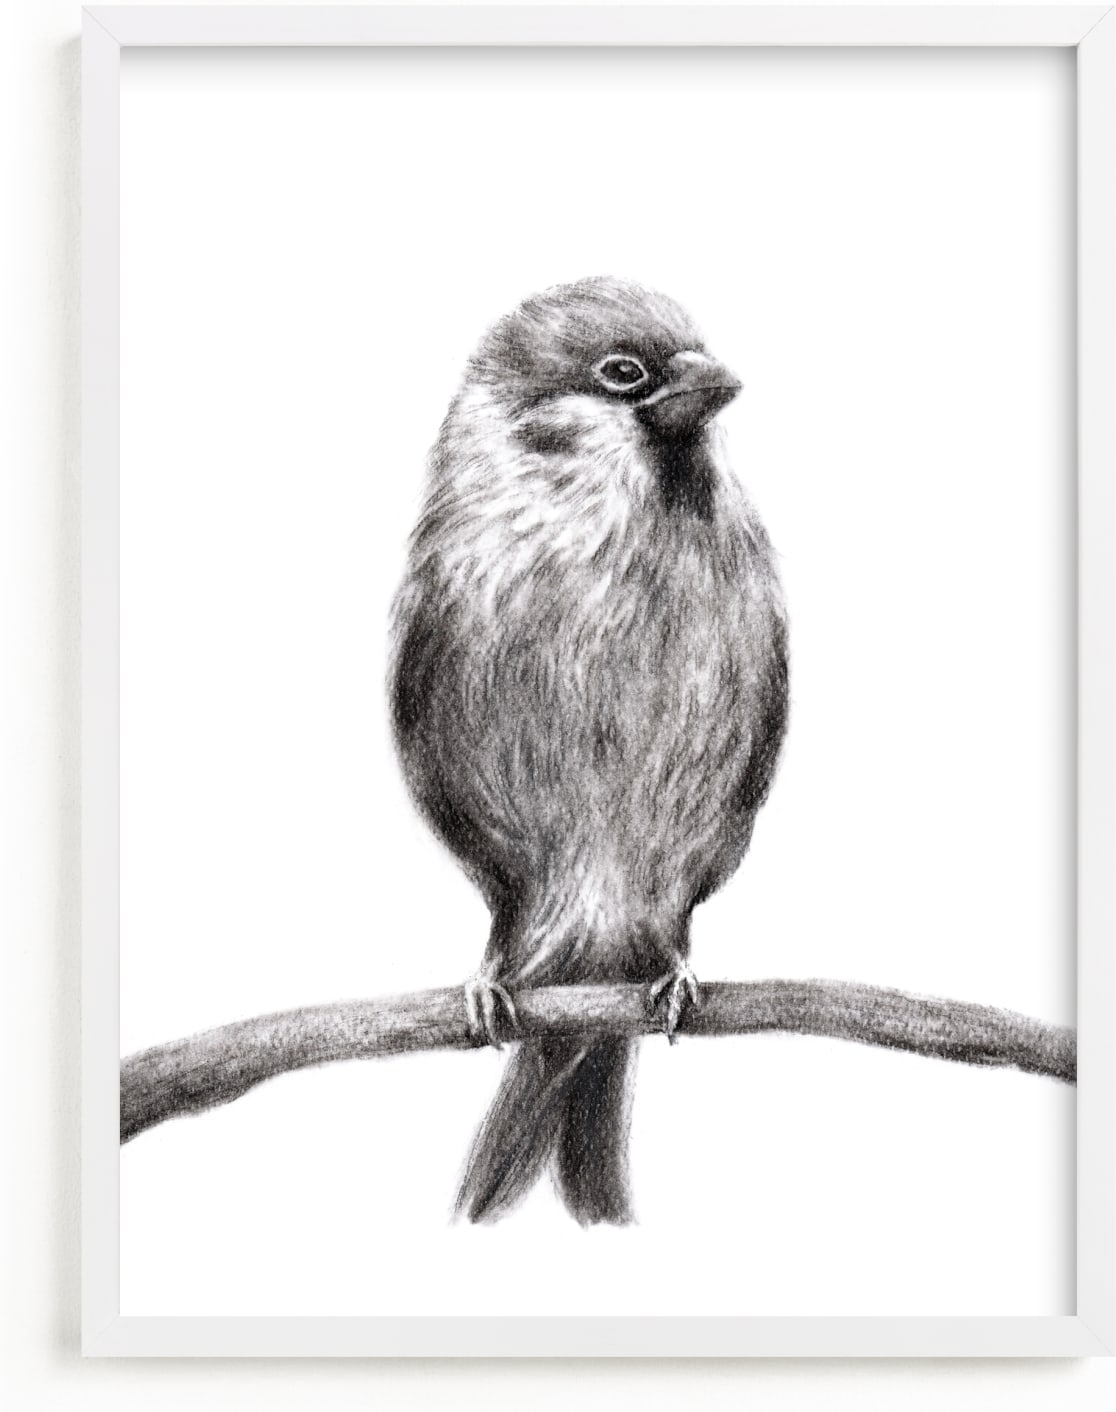 This is a black and white art by Elly called Little Sparrow.